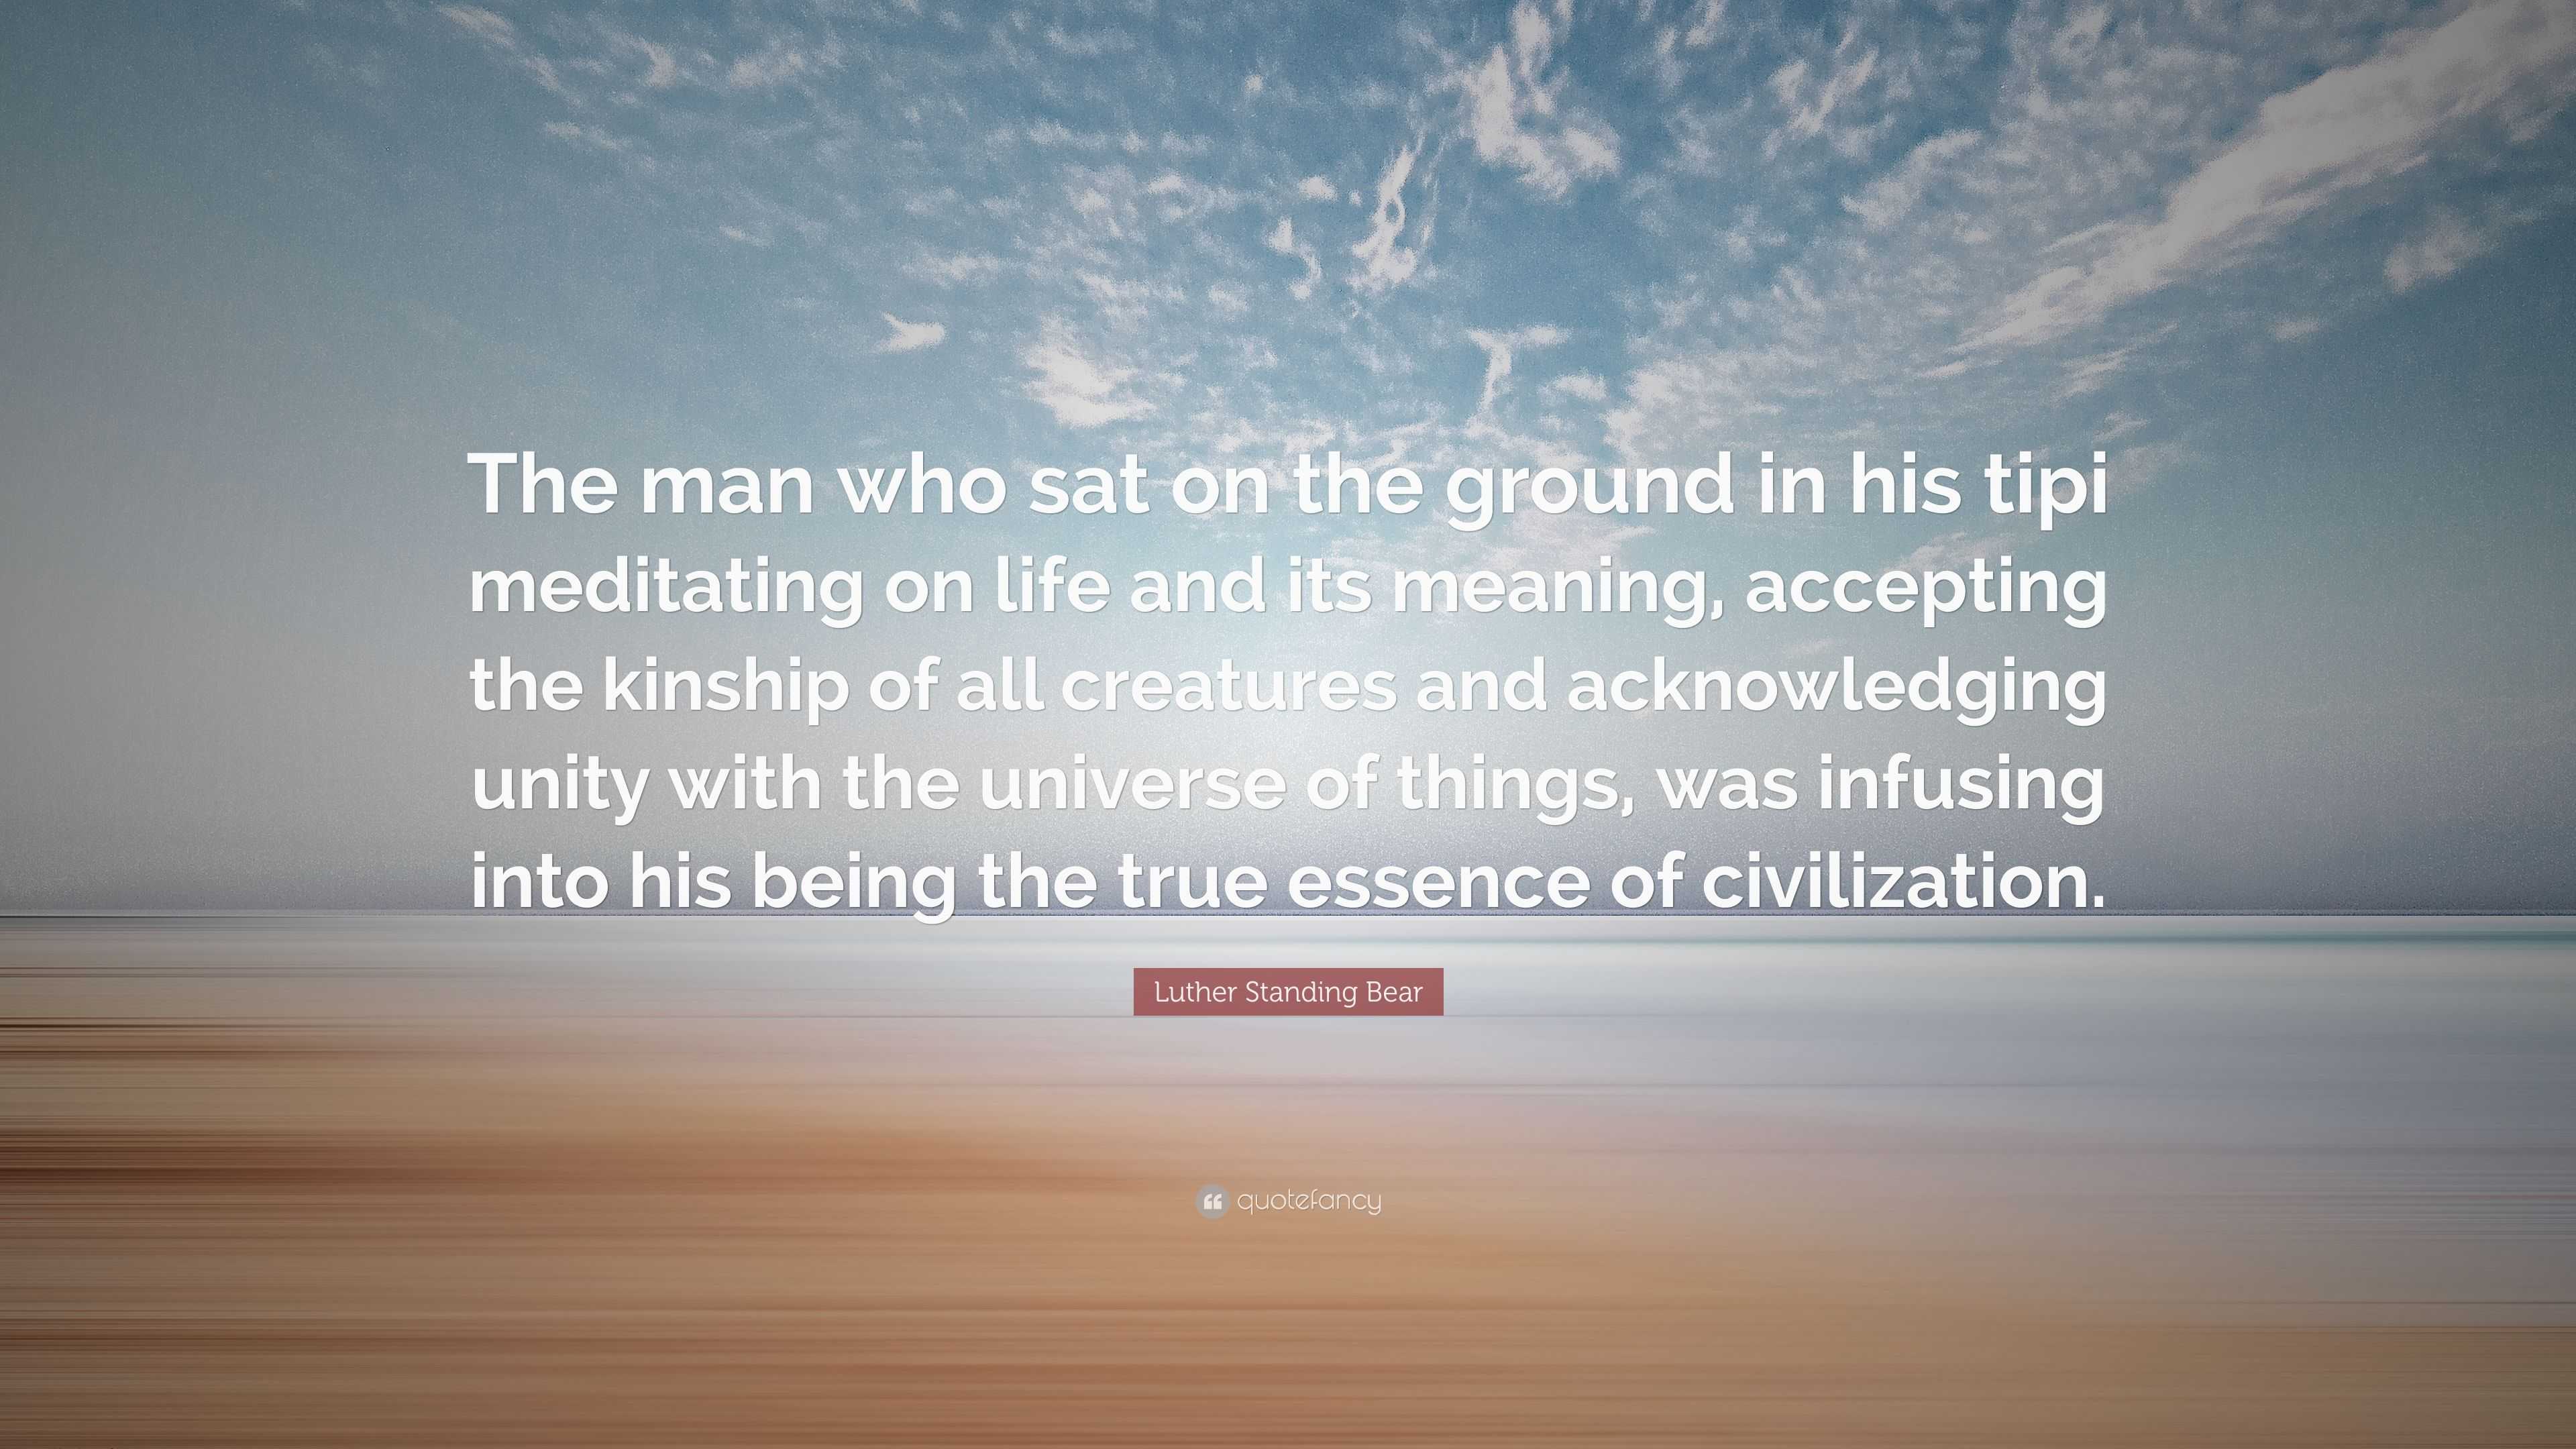 Luther Standing Bear Quote: “The man who sat on the ground in his tipi ...